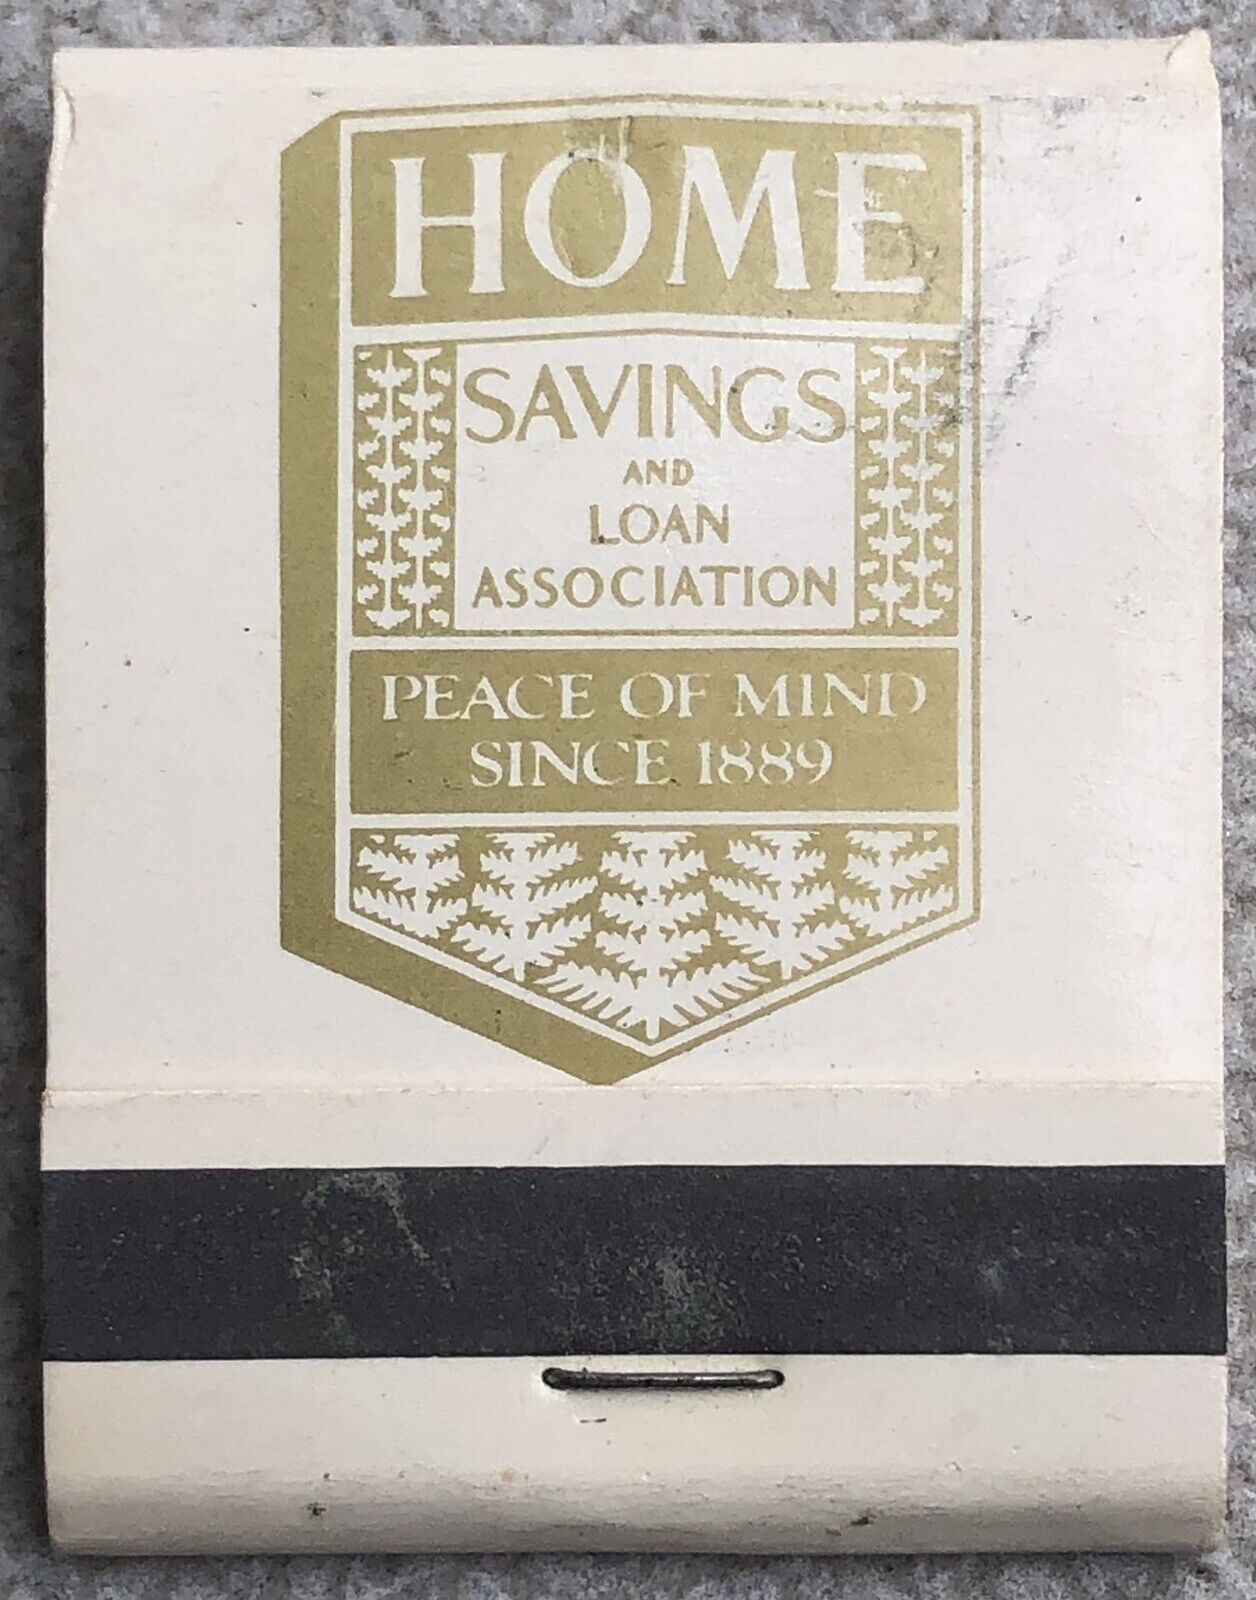 Home Savings and Loan Association Vintage Matchbook Cover - New